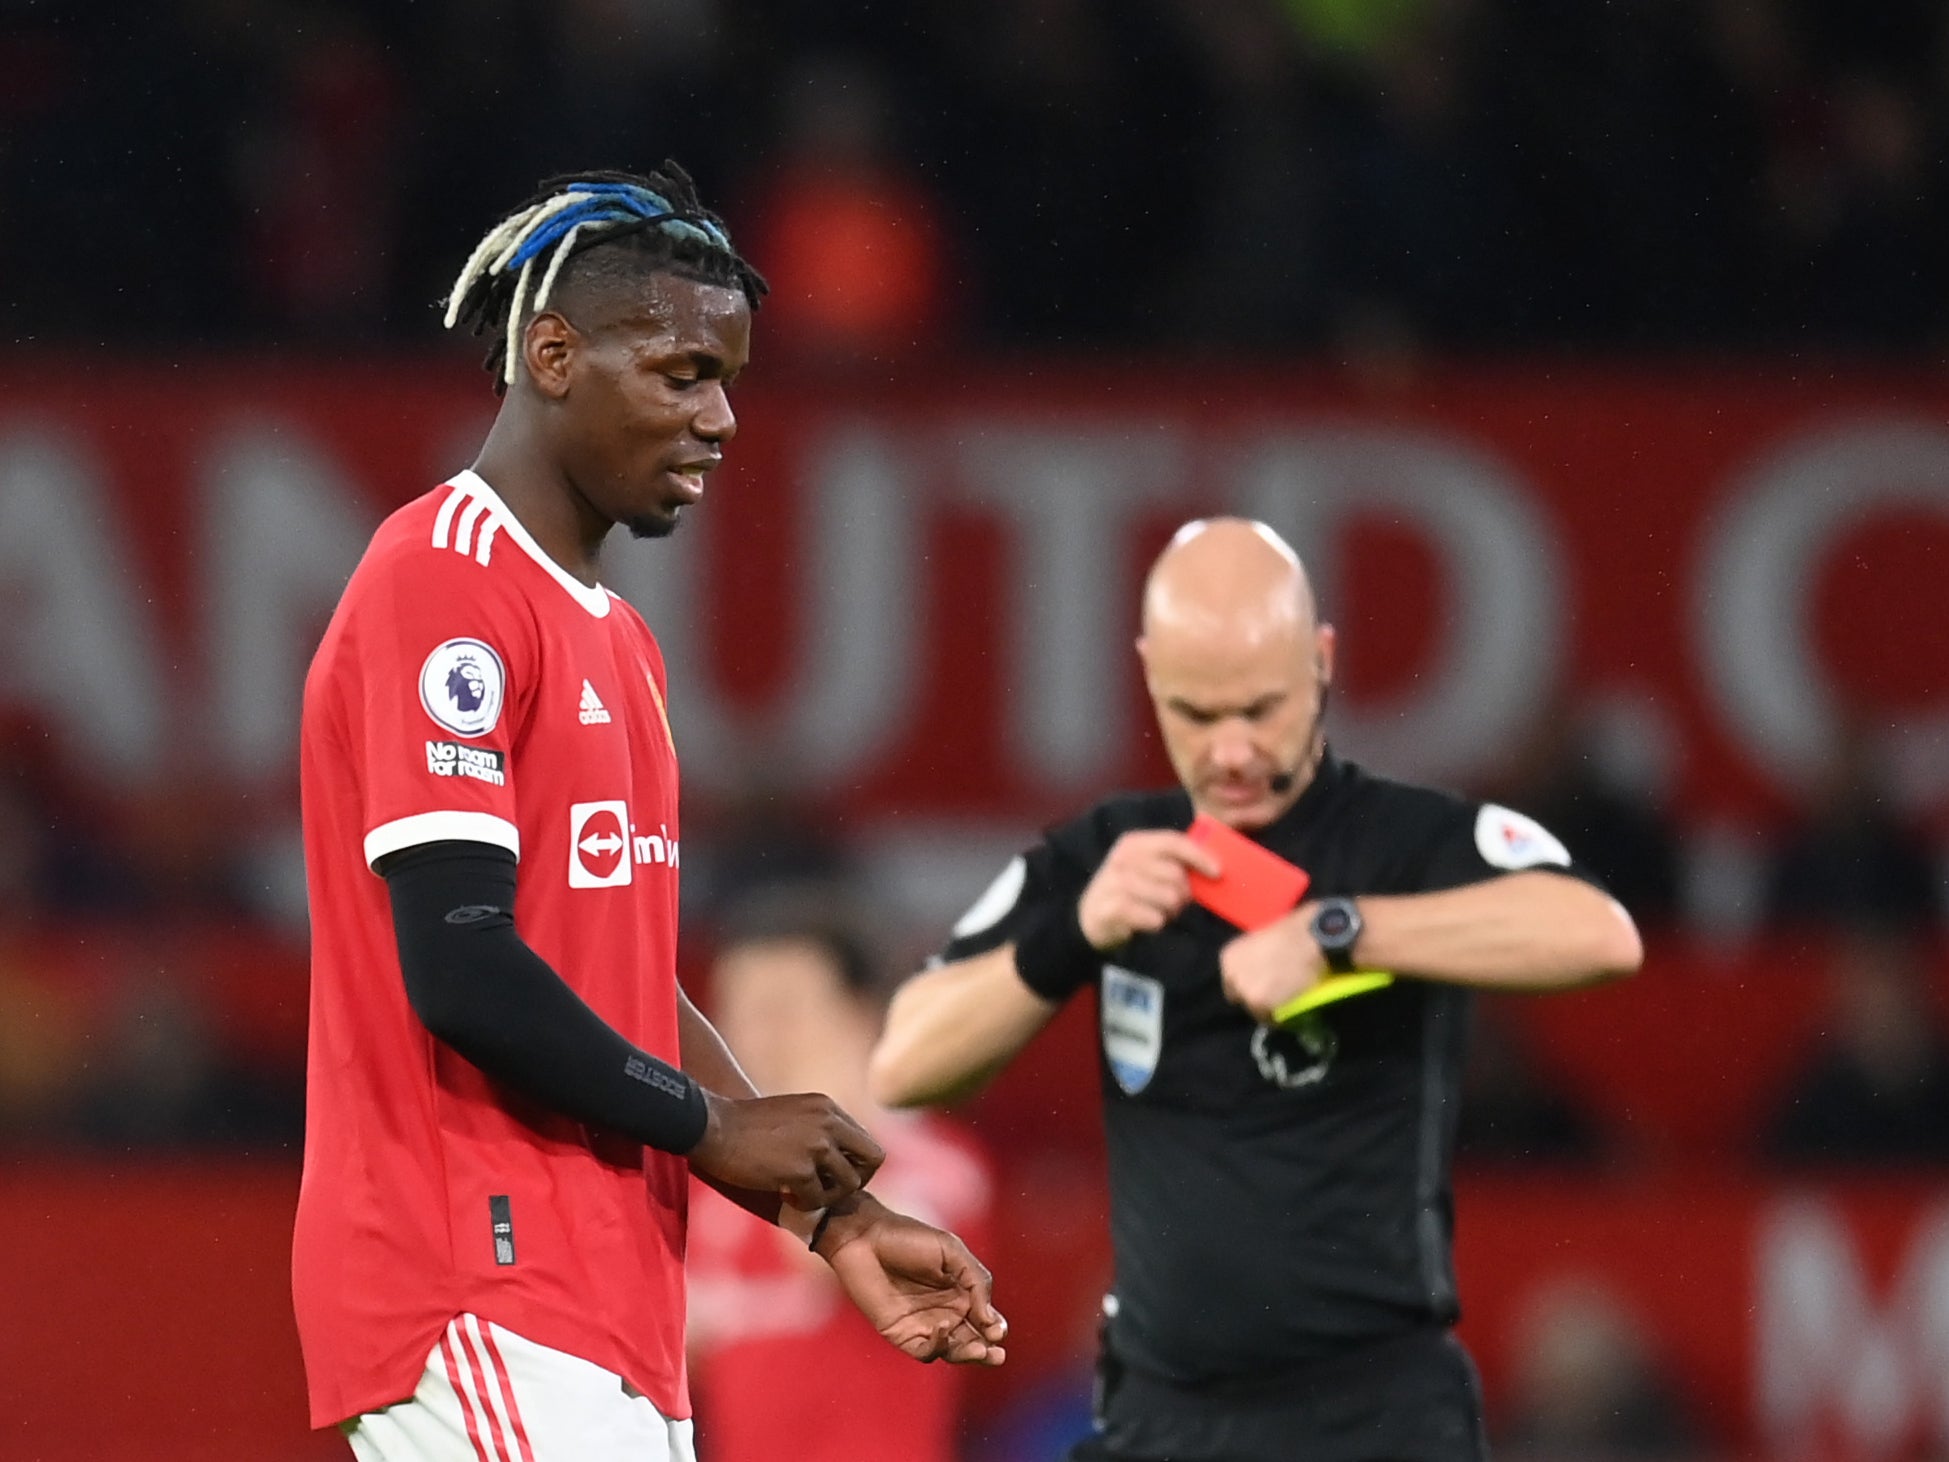 Paul Pogba was sent off for United after a VAR check led referee Anthony Taylor to upgrade his yellow card to a red